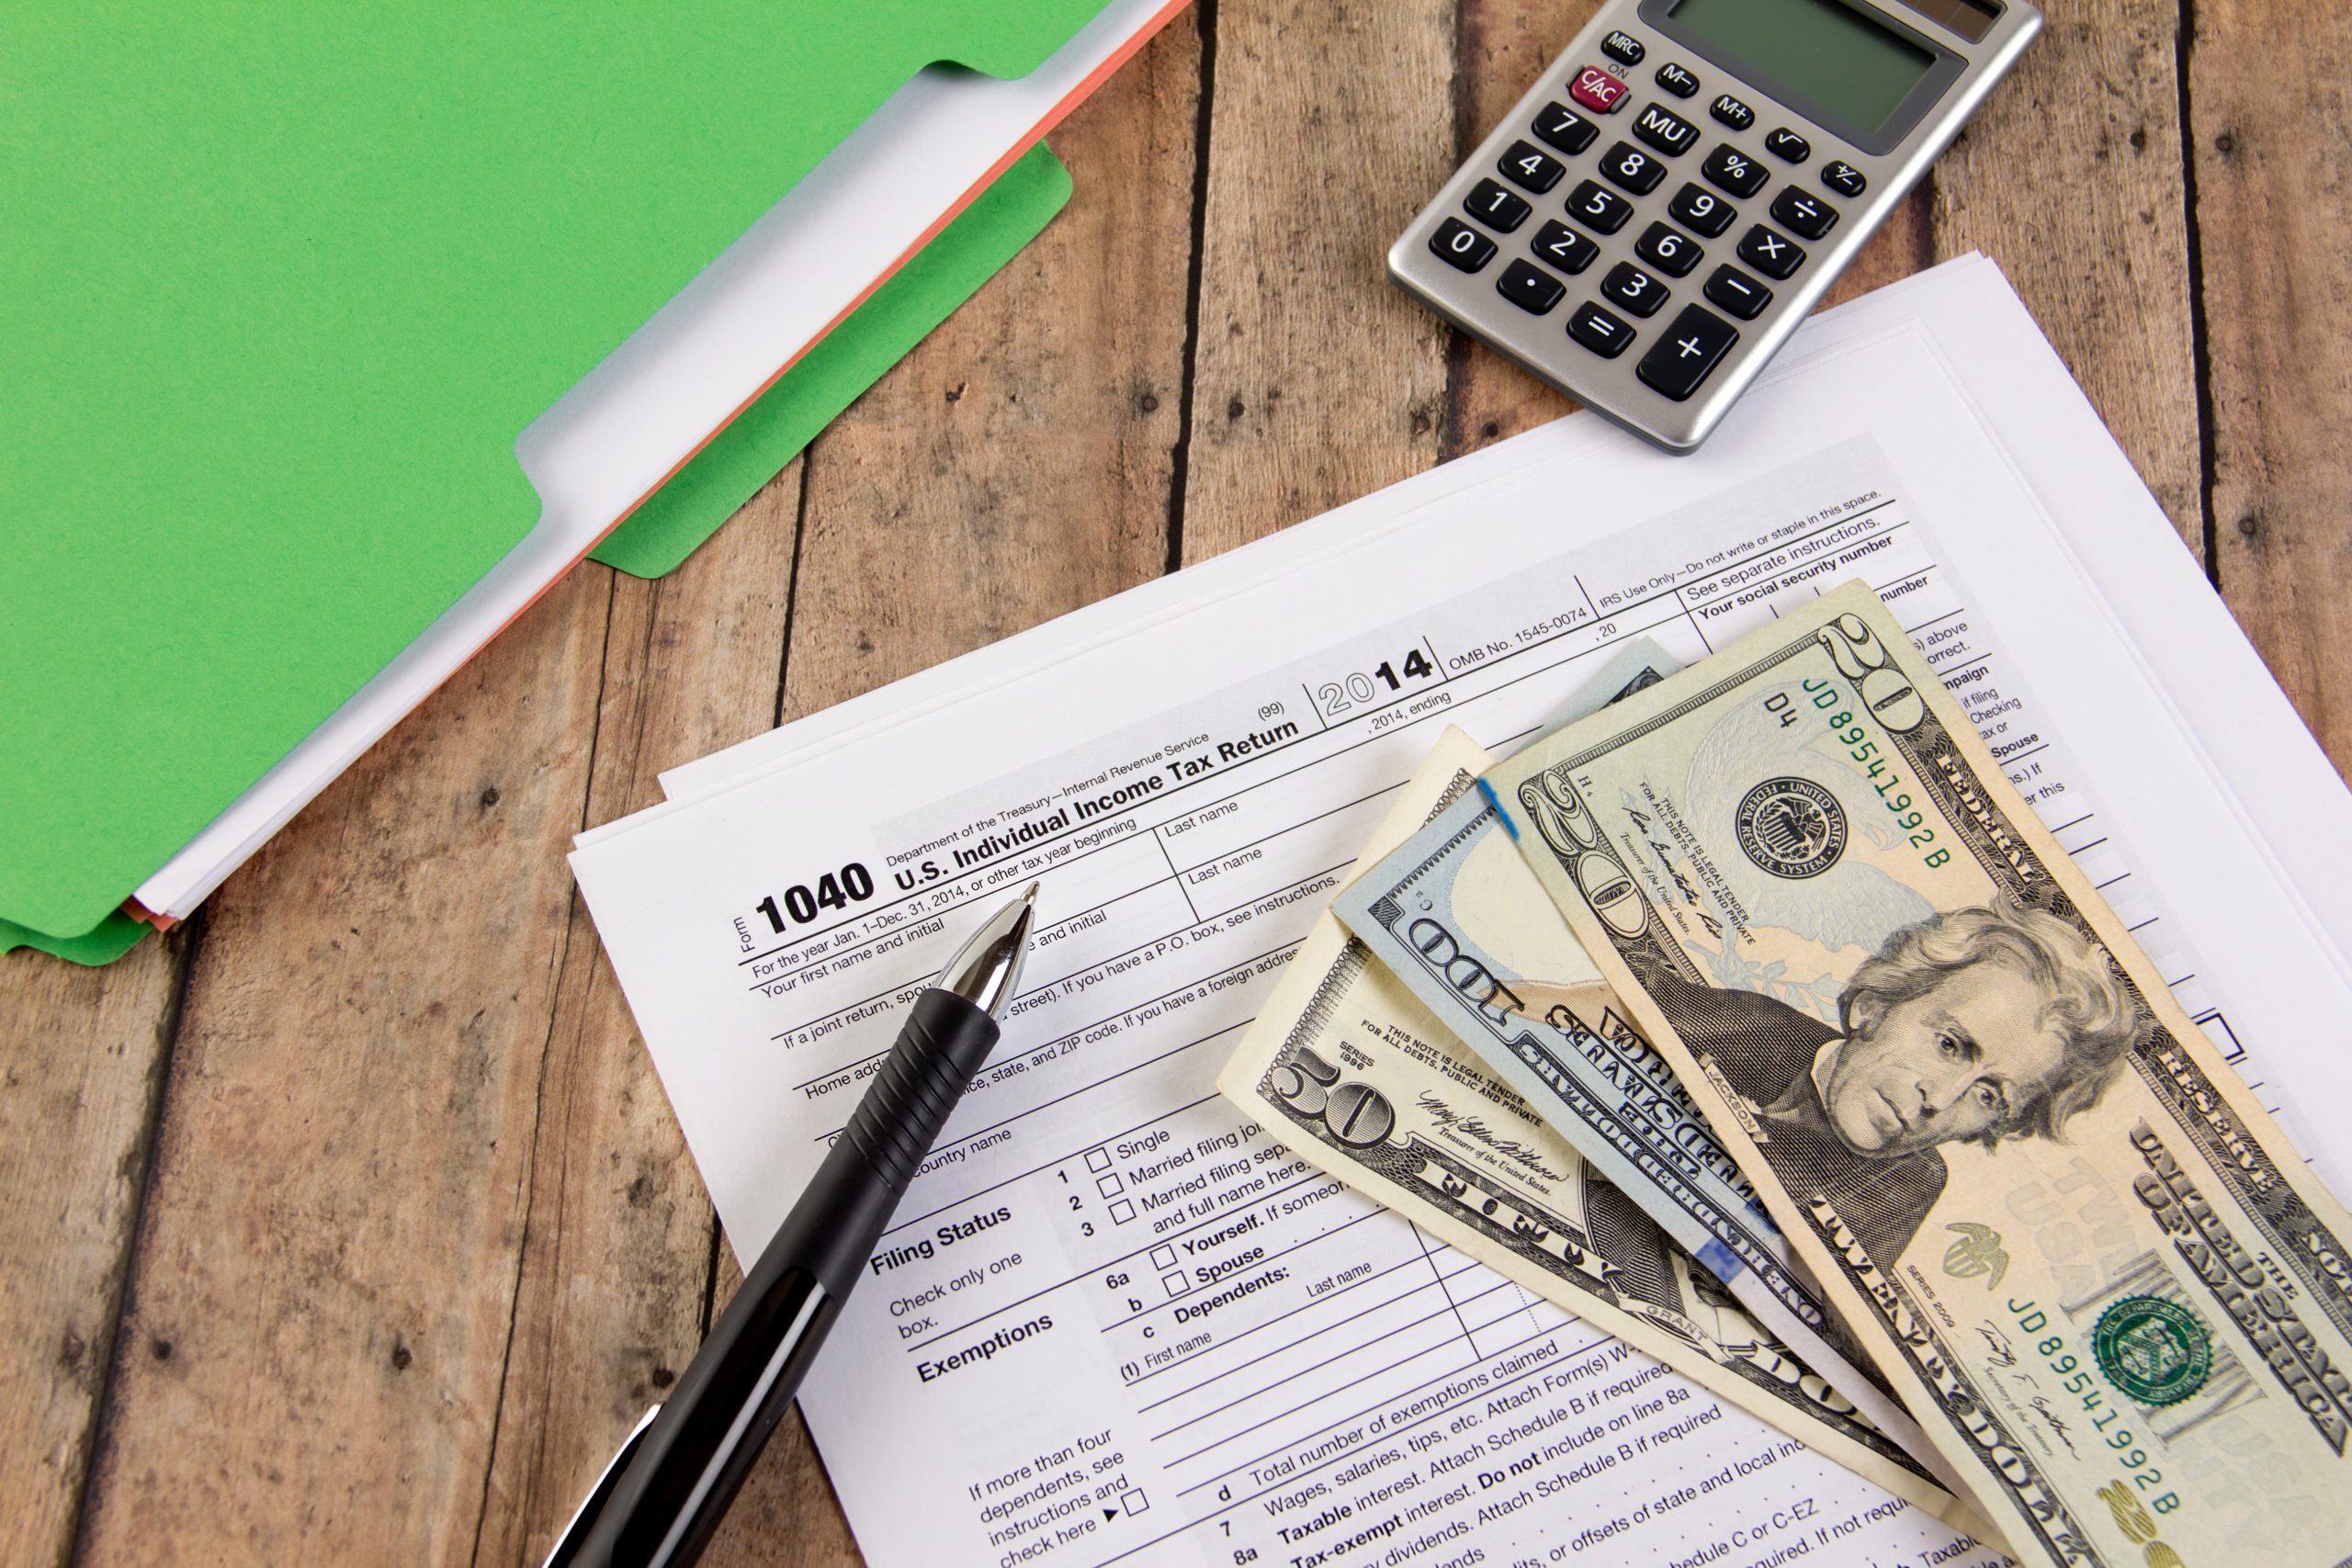 5 Smart Ways to Use Your Tax Refund This Year